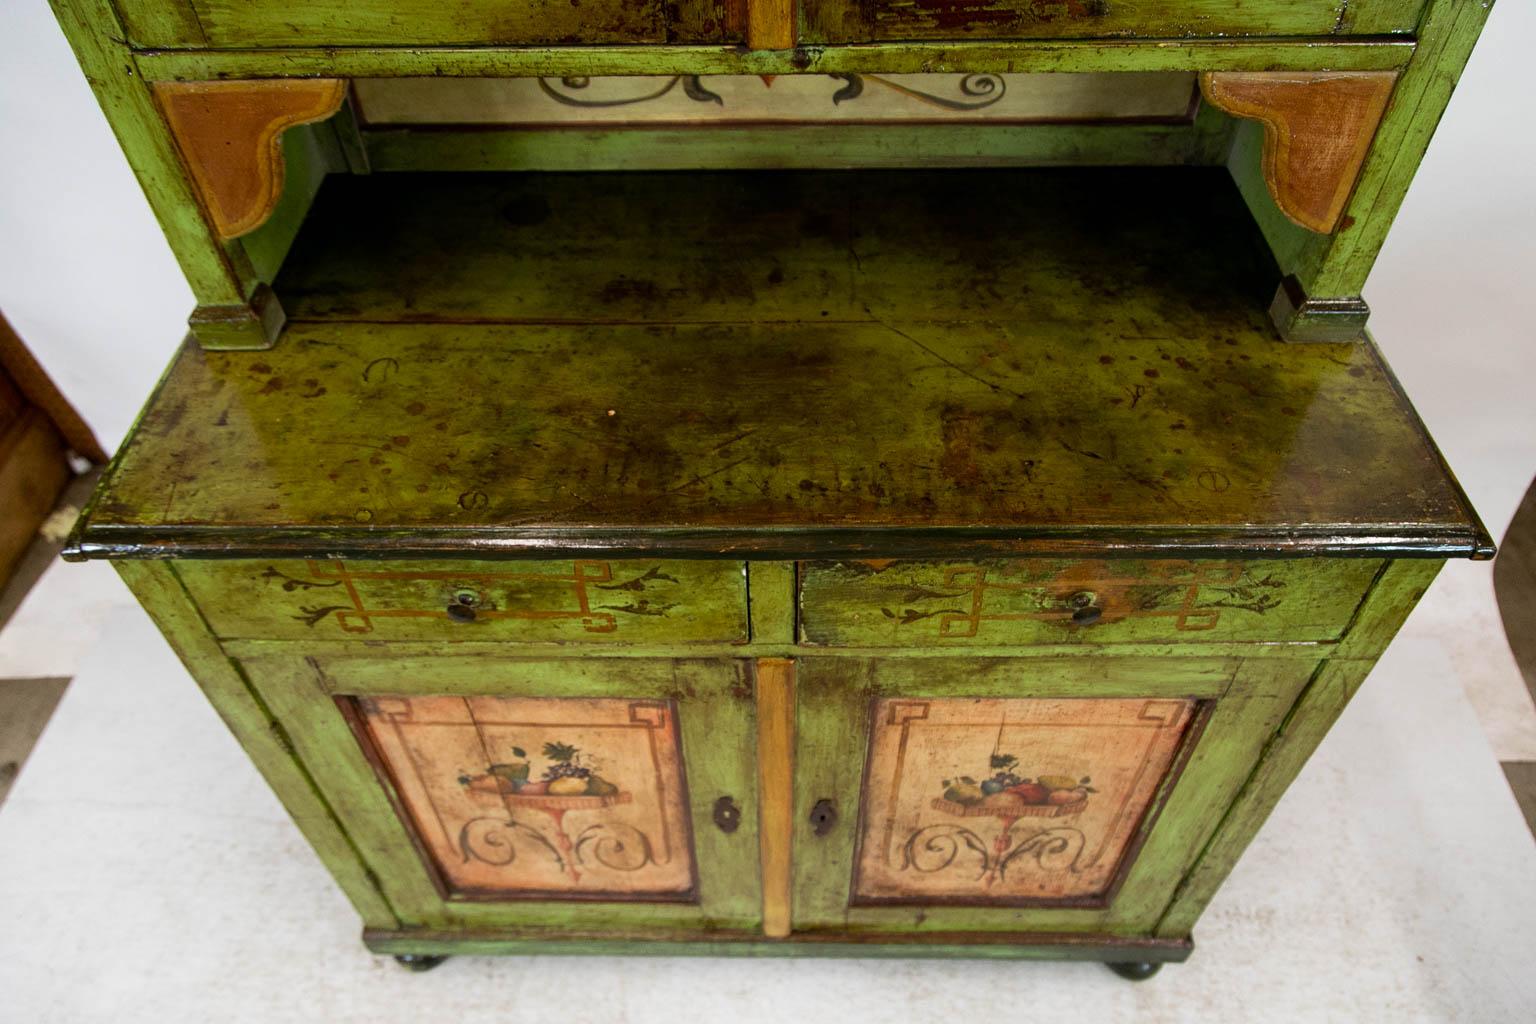 This cupboard has weathered green paint throughout with geometric and floral designs painted on the front. The lower doors have recessed panels with baskets of fruit supported by leaf arabesques. The upper doors have one fixed shelf as well as the